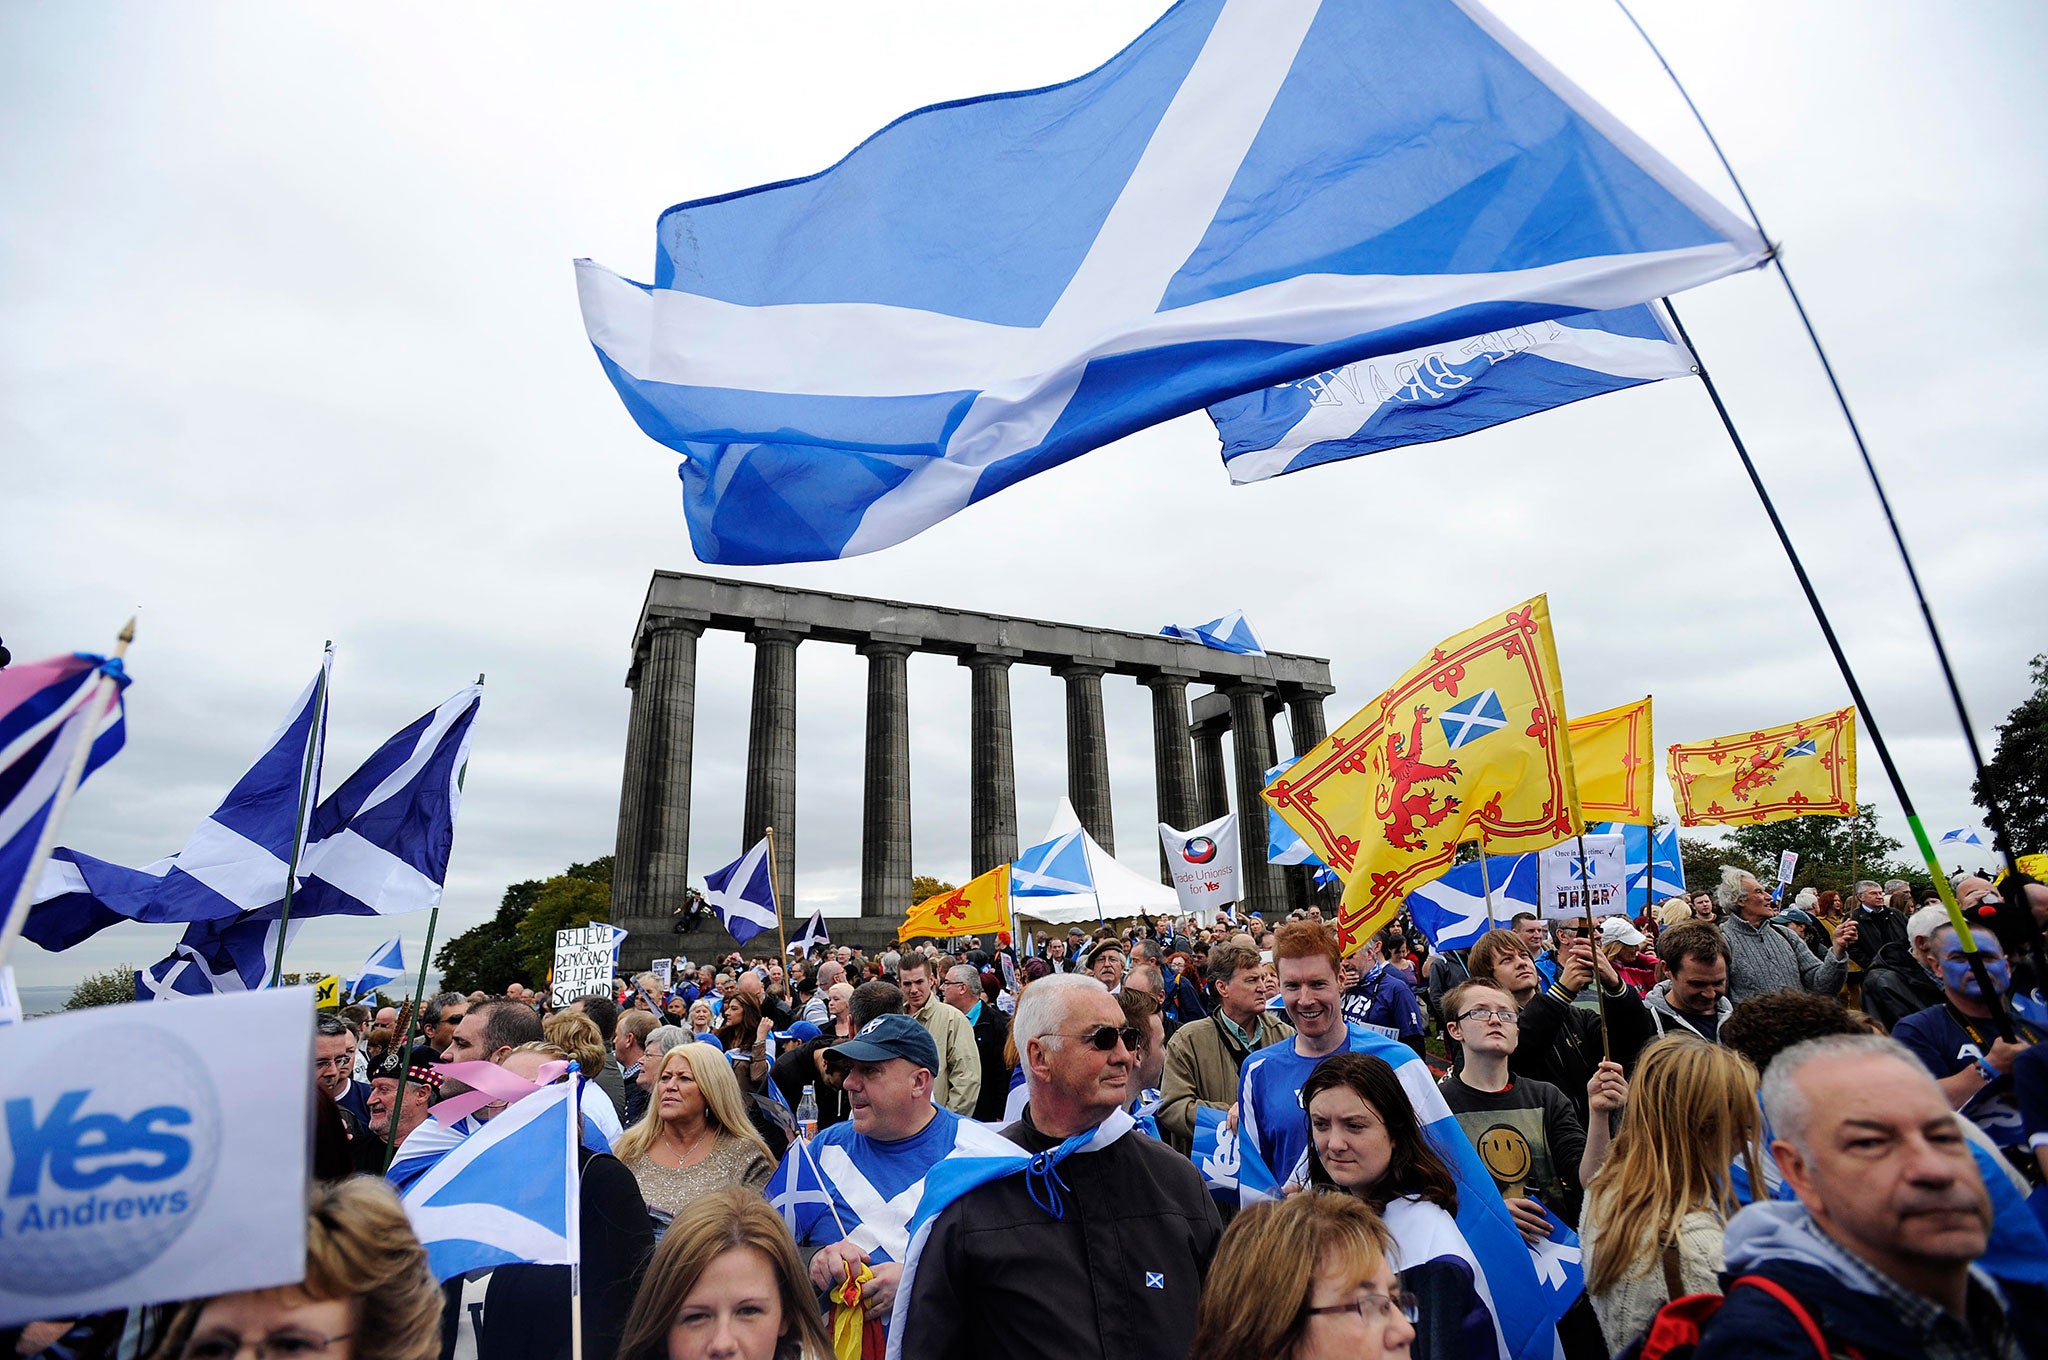 Pro-indpendence supporters gather in Edinburgh before 2014's referendum